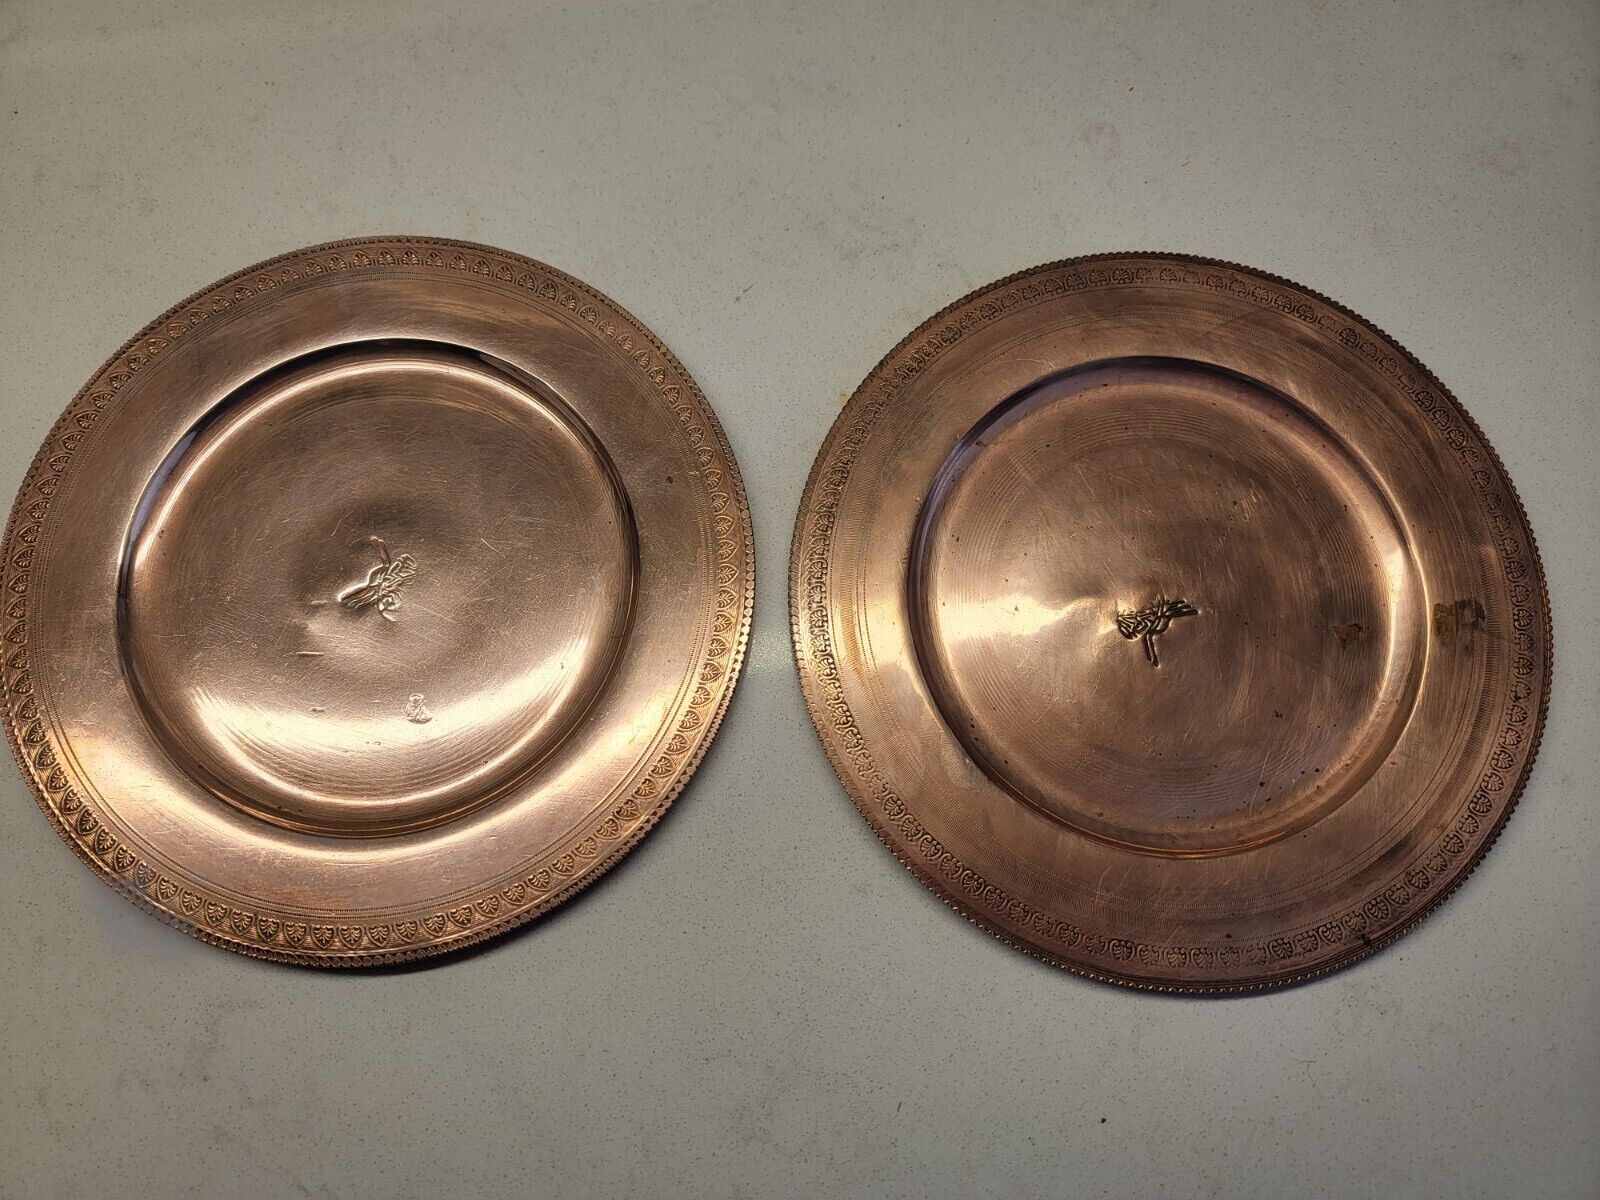 Antique Copper Etched Stamped Plates. 